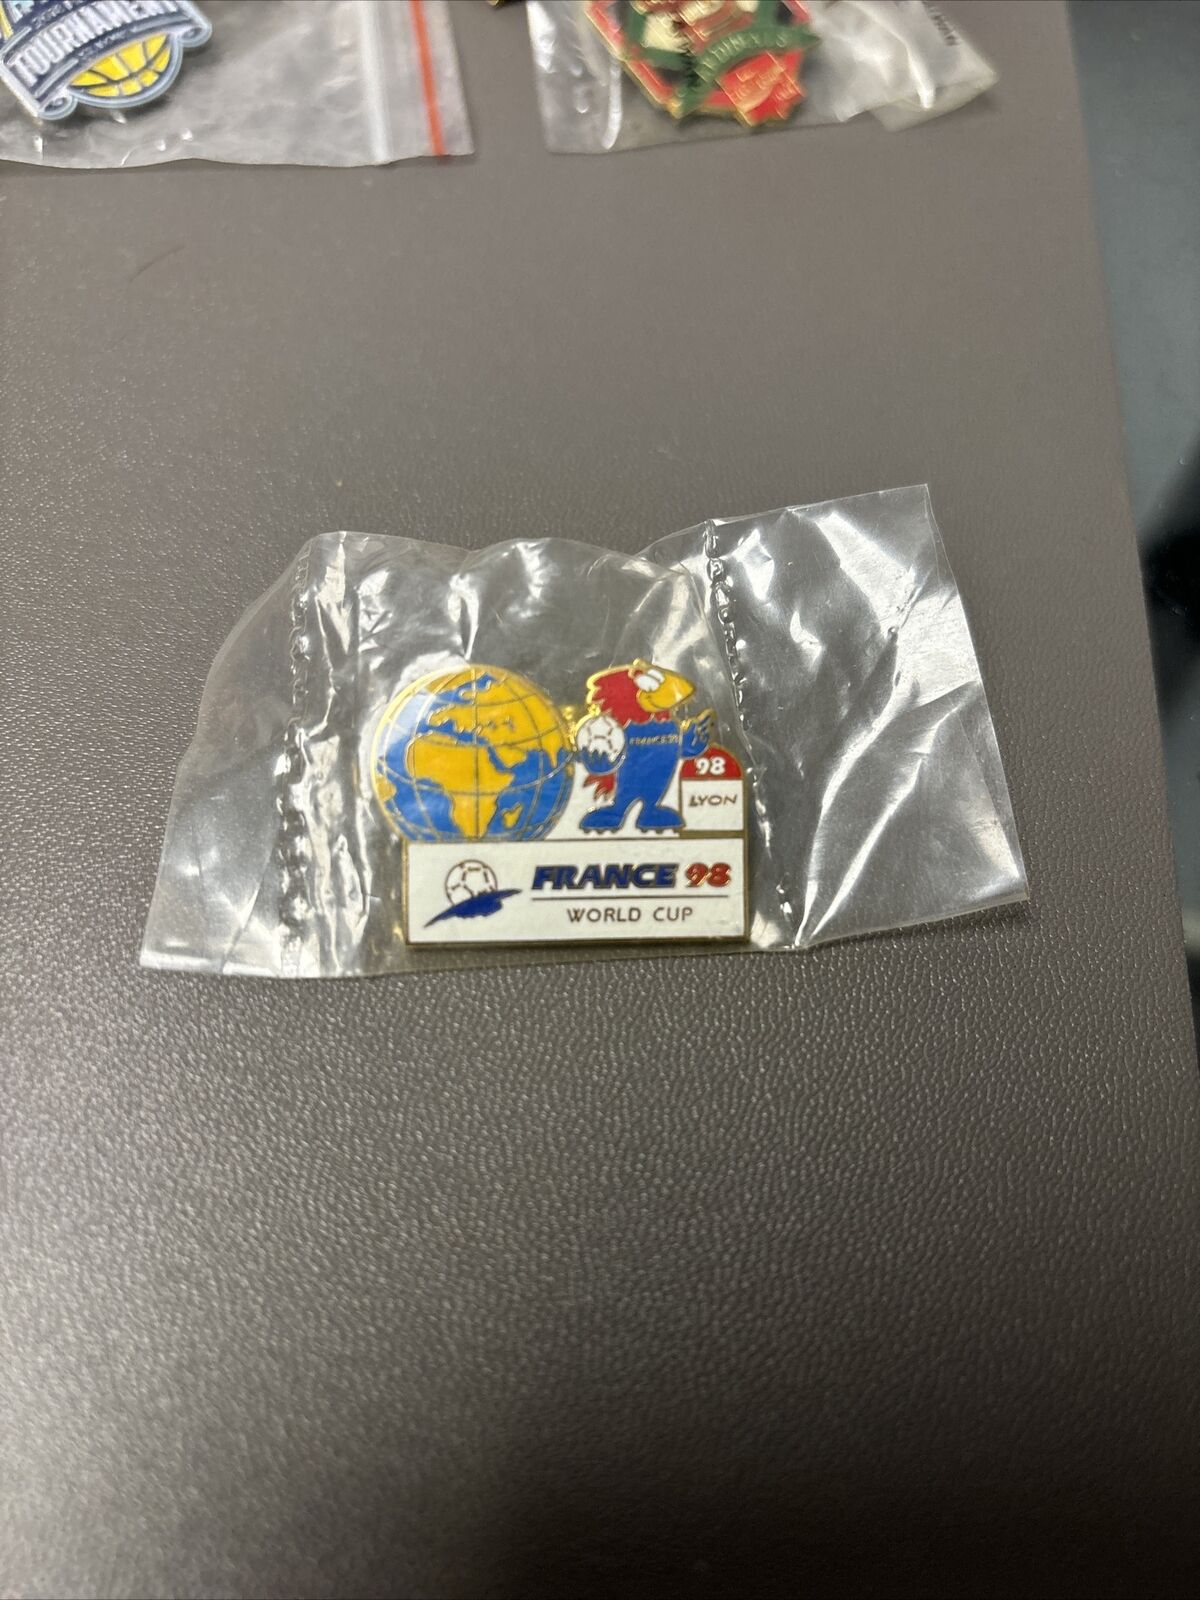 FIFA World Cup 98 France Pin Brand New